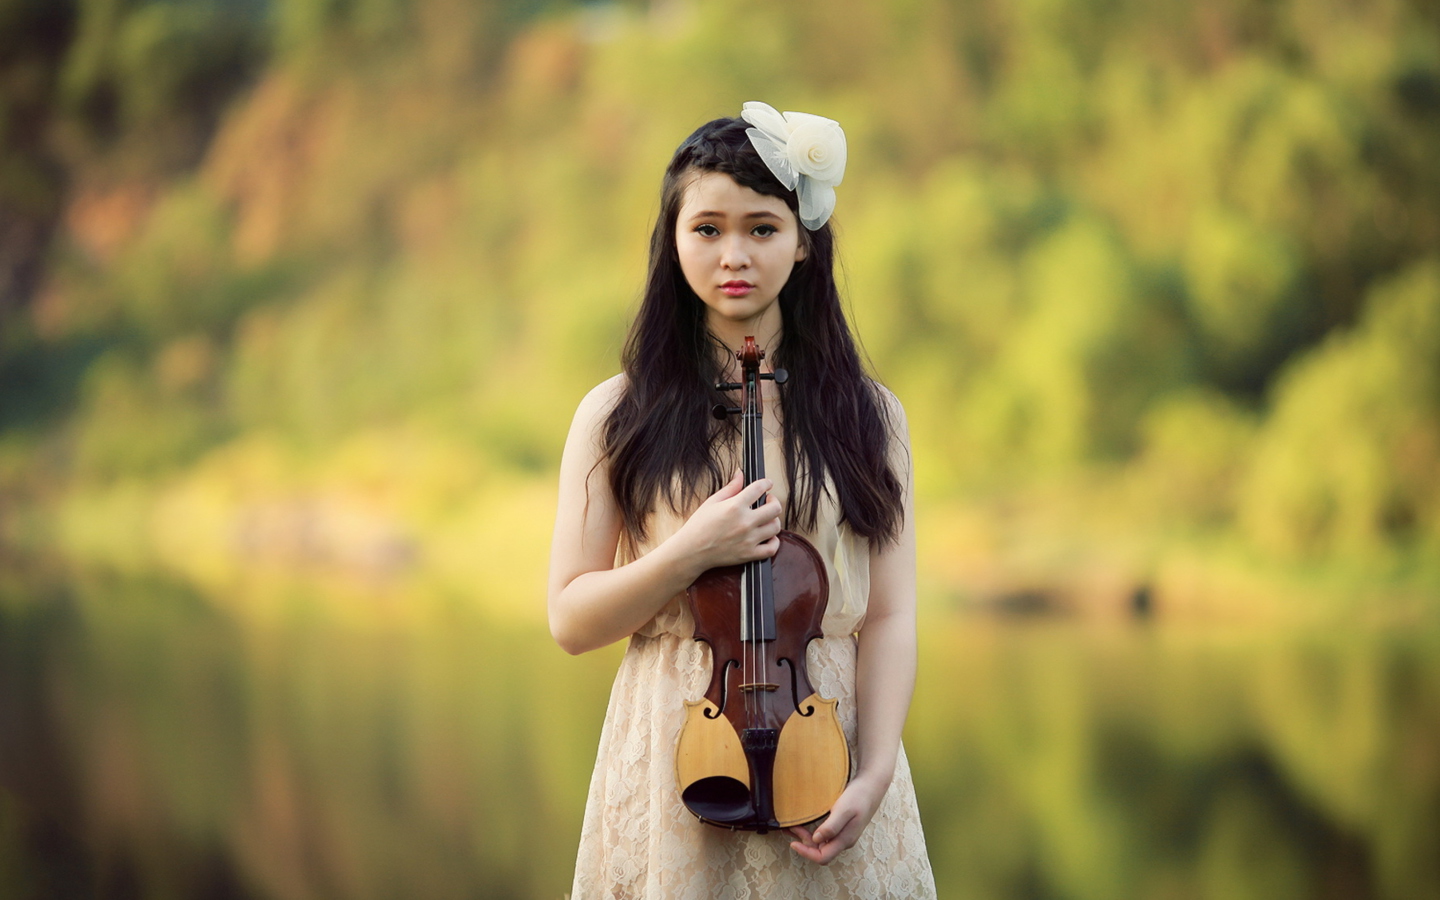 Girl With Violin wallpaper 1440x900